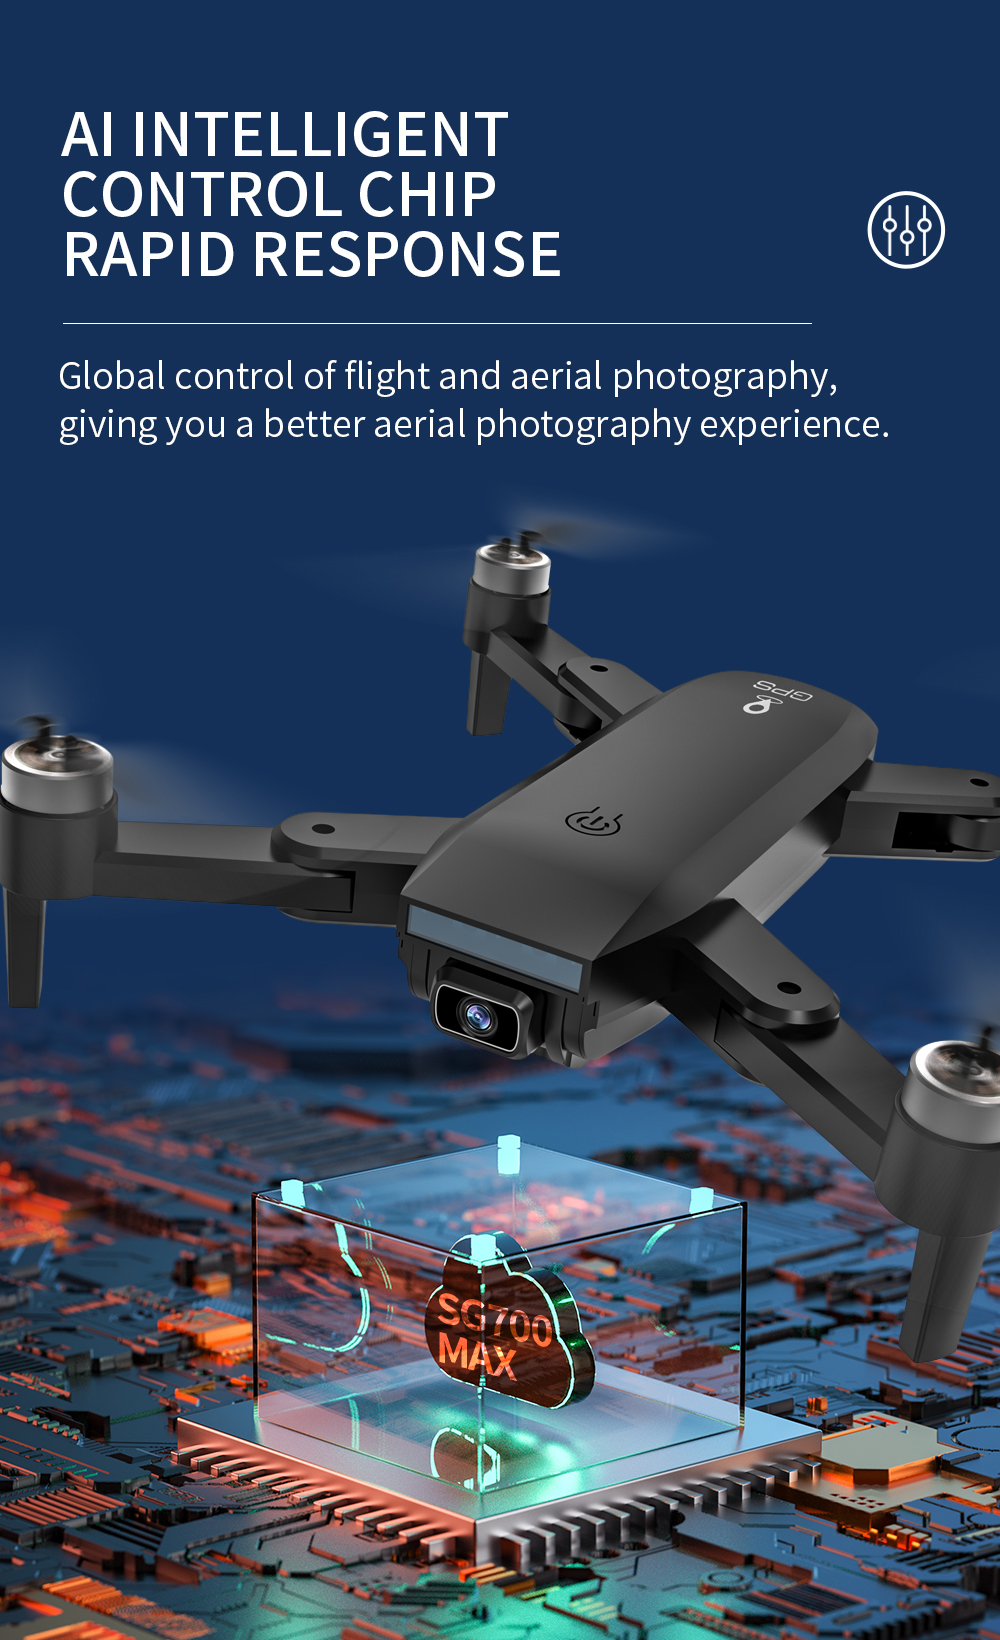 ZLL-SG700-MAX-5G-WIFI-FPV-GPS-with-4K-HD-Dual-Camera-22mins-Flight-Time-Optical-Flow-Positioning-Bru-1853047-15